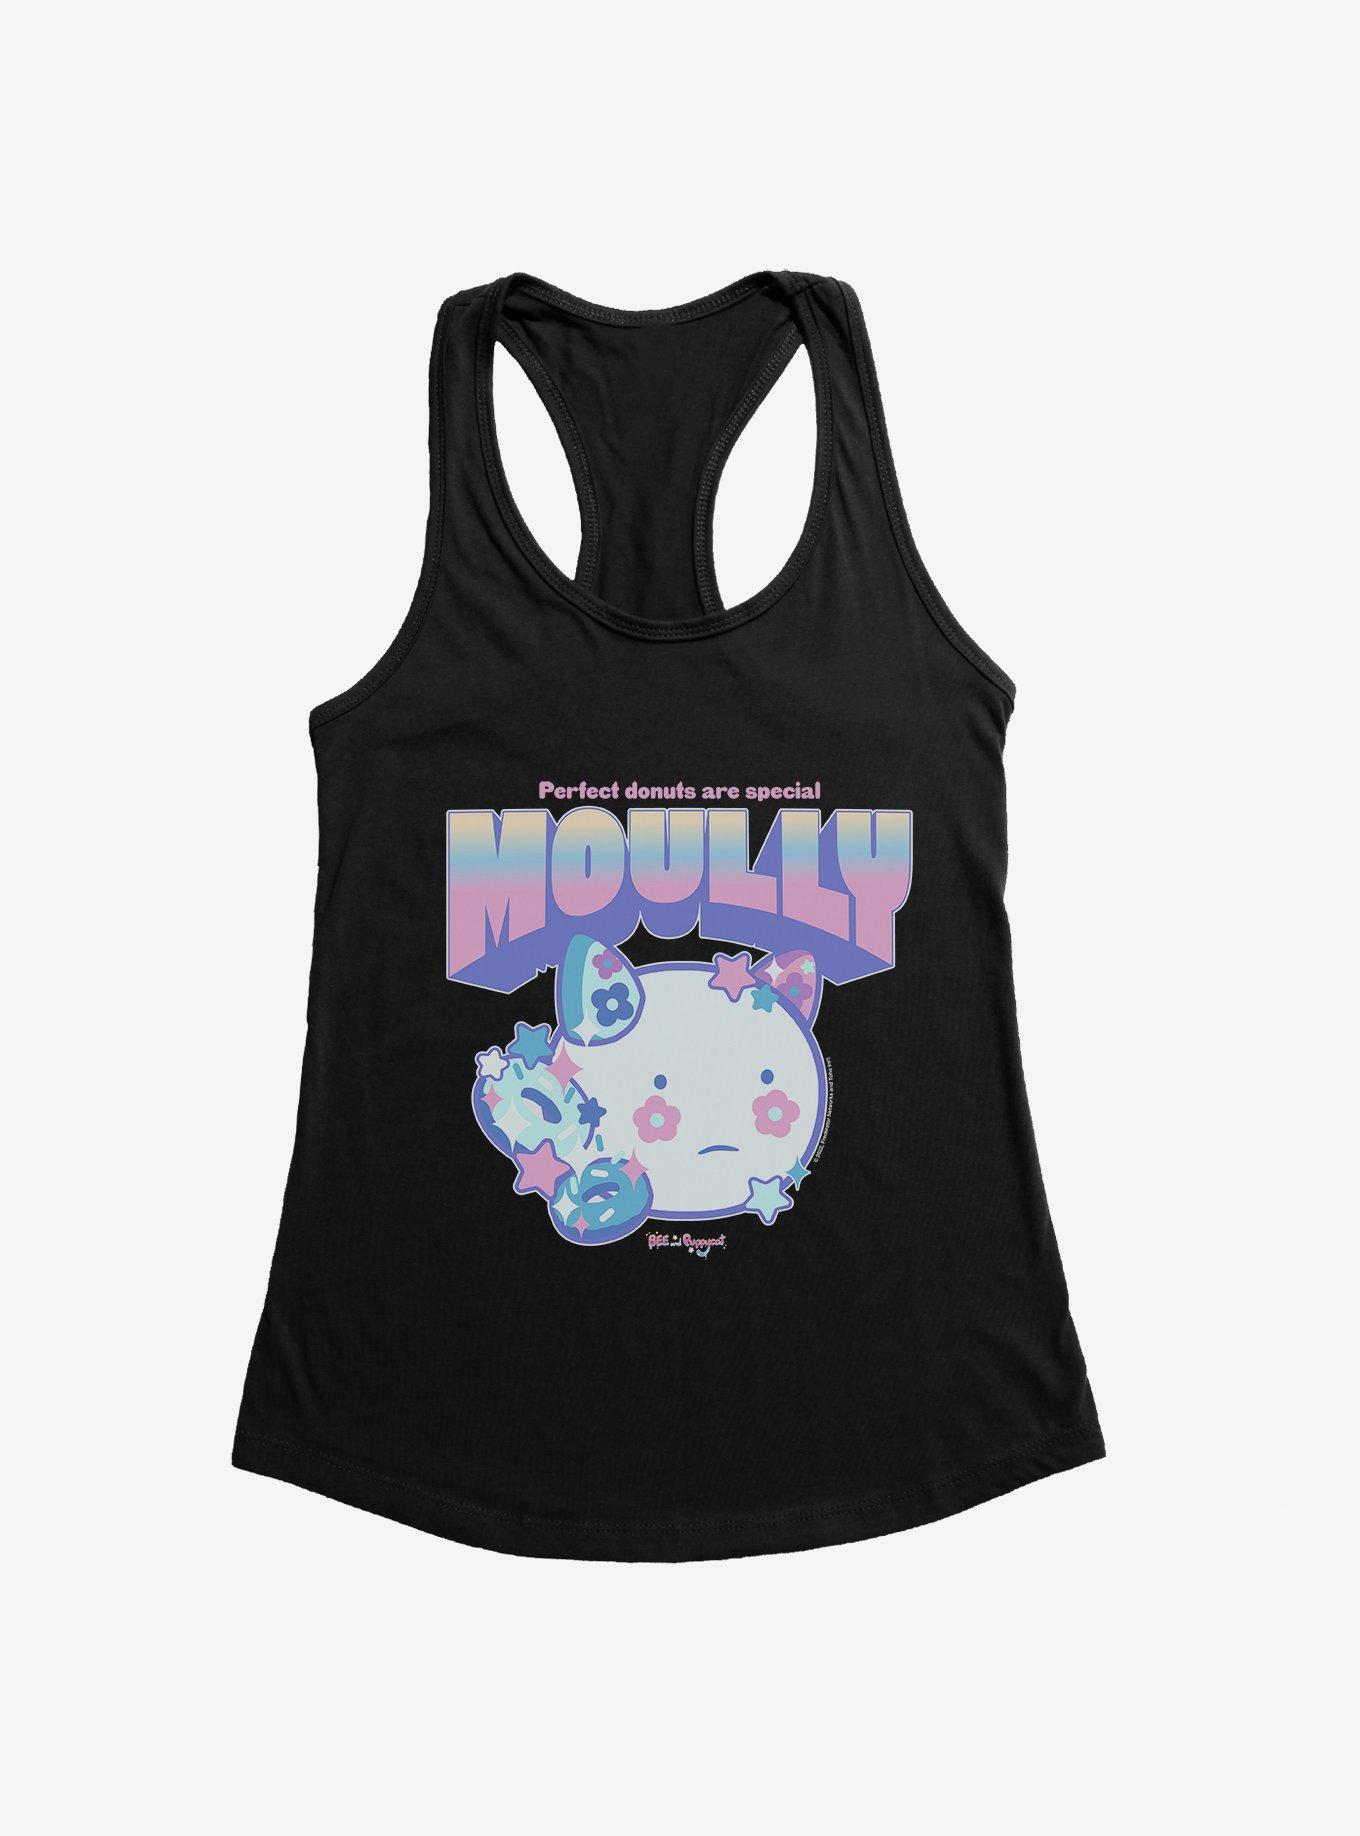 Bee And Puppycat Moully Perfect Donuts Girls Tank, BLACK, hi-res